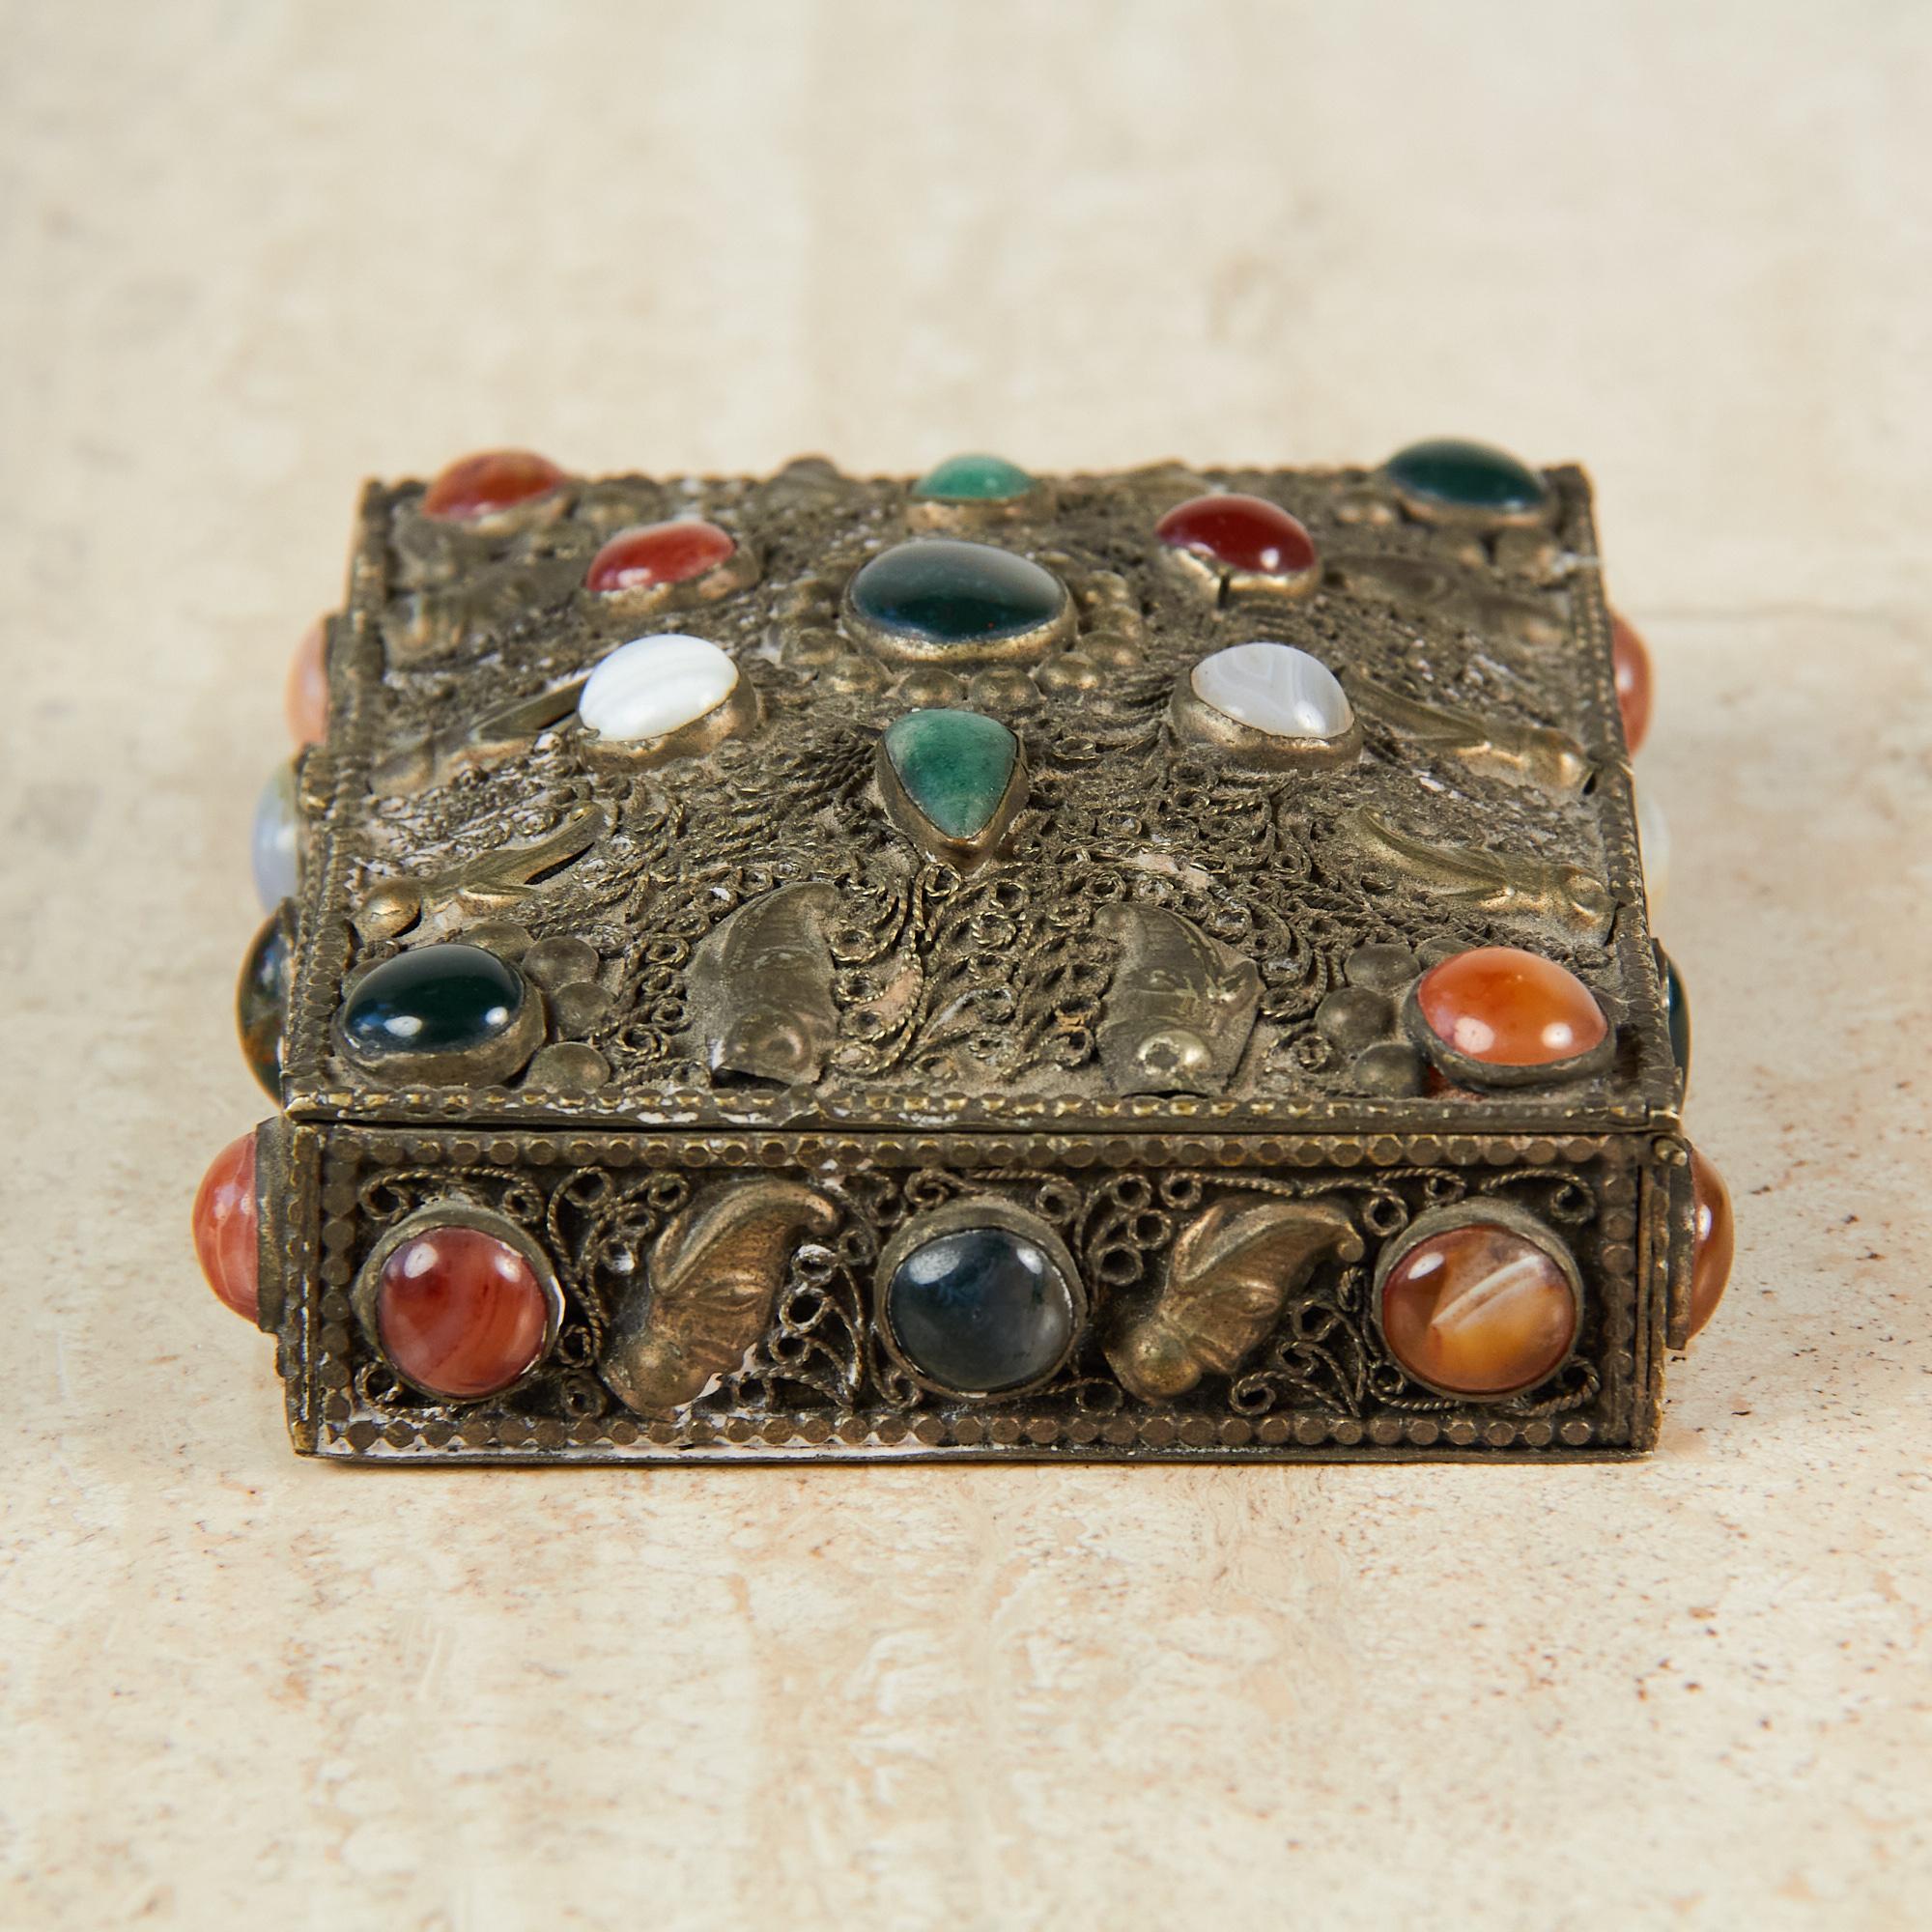 20th Century Ornate Pewter Box with Mixed Stones